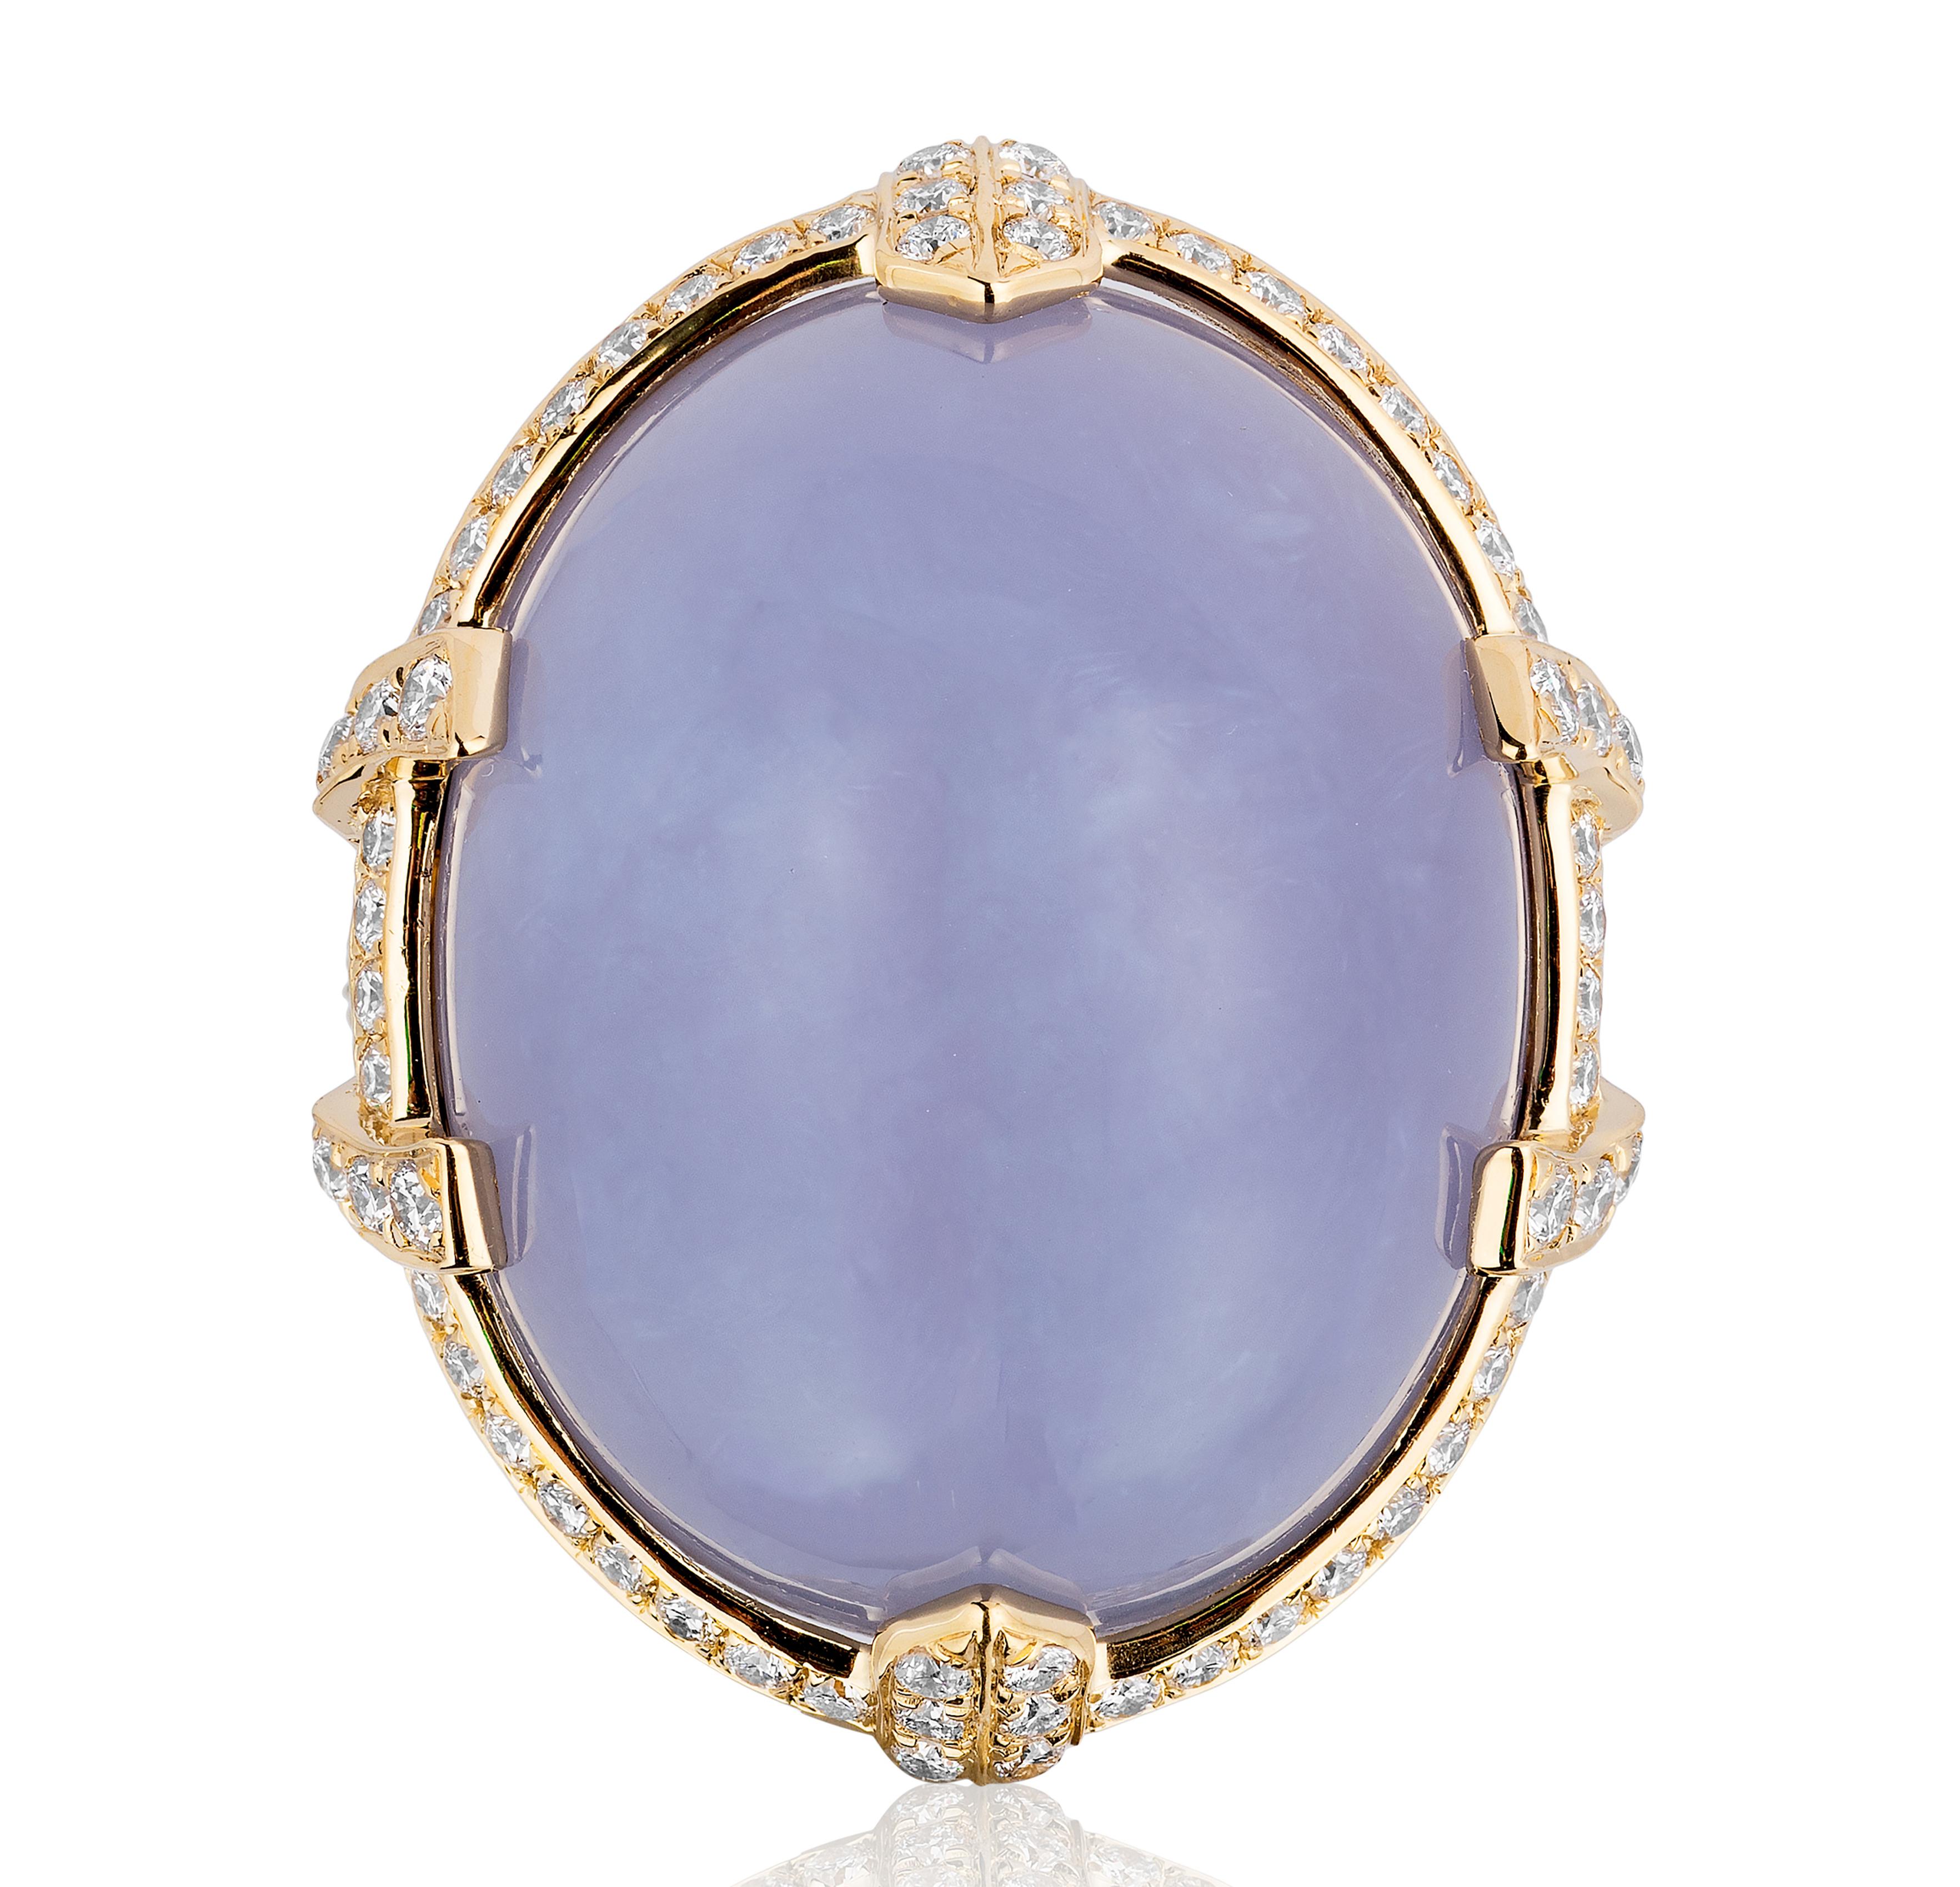 Blue Chalcedony Cabochon Ring with Bow Prong Diamonds in 18K Yellow Gold, 'Limited-Edition'.
These limited edition items are just that! Limited! 
Feel the exclusiveness and the love in every piece from this collection. Beautifully crafted, these